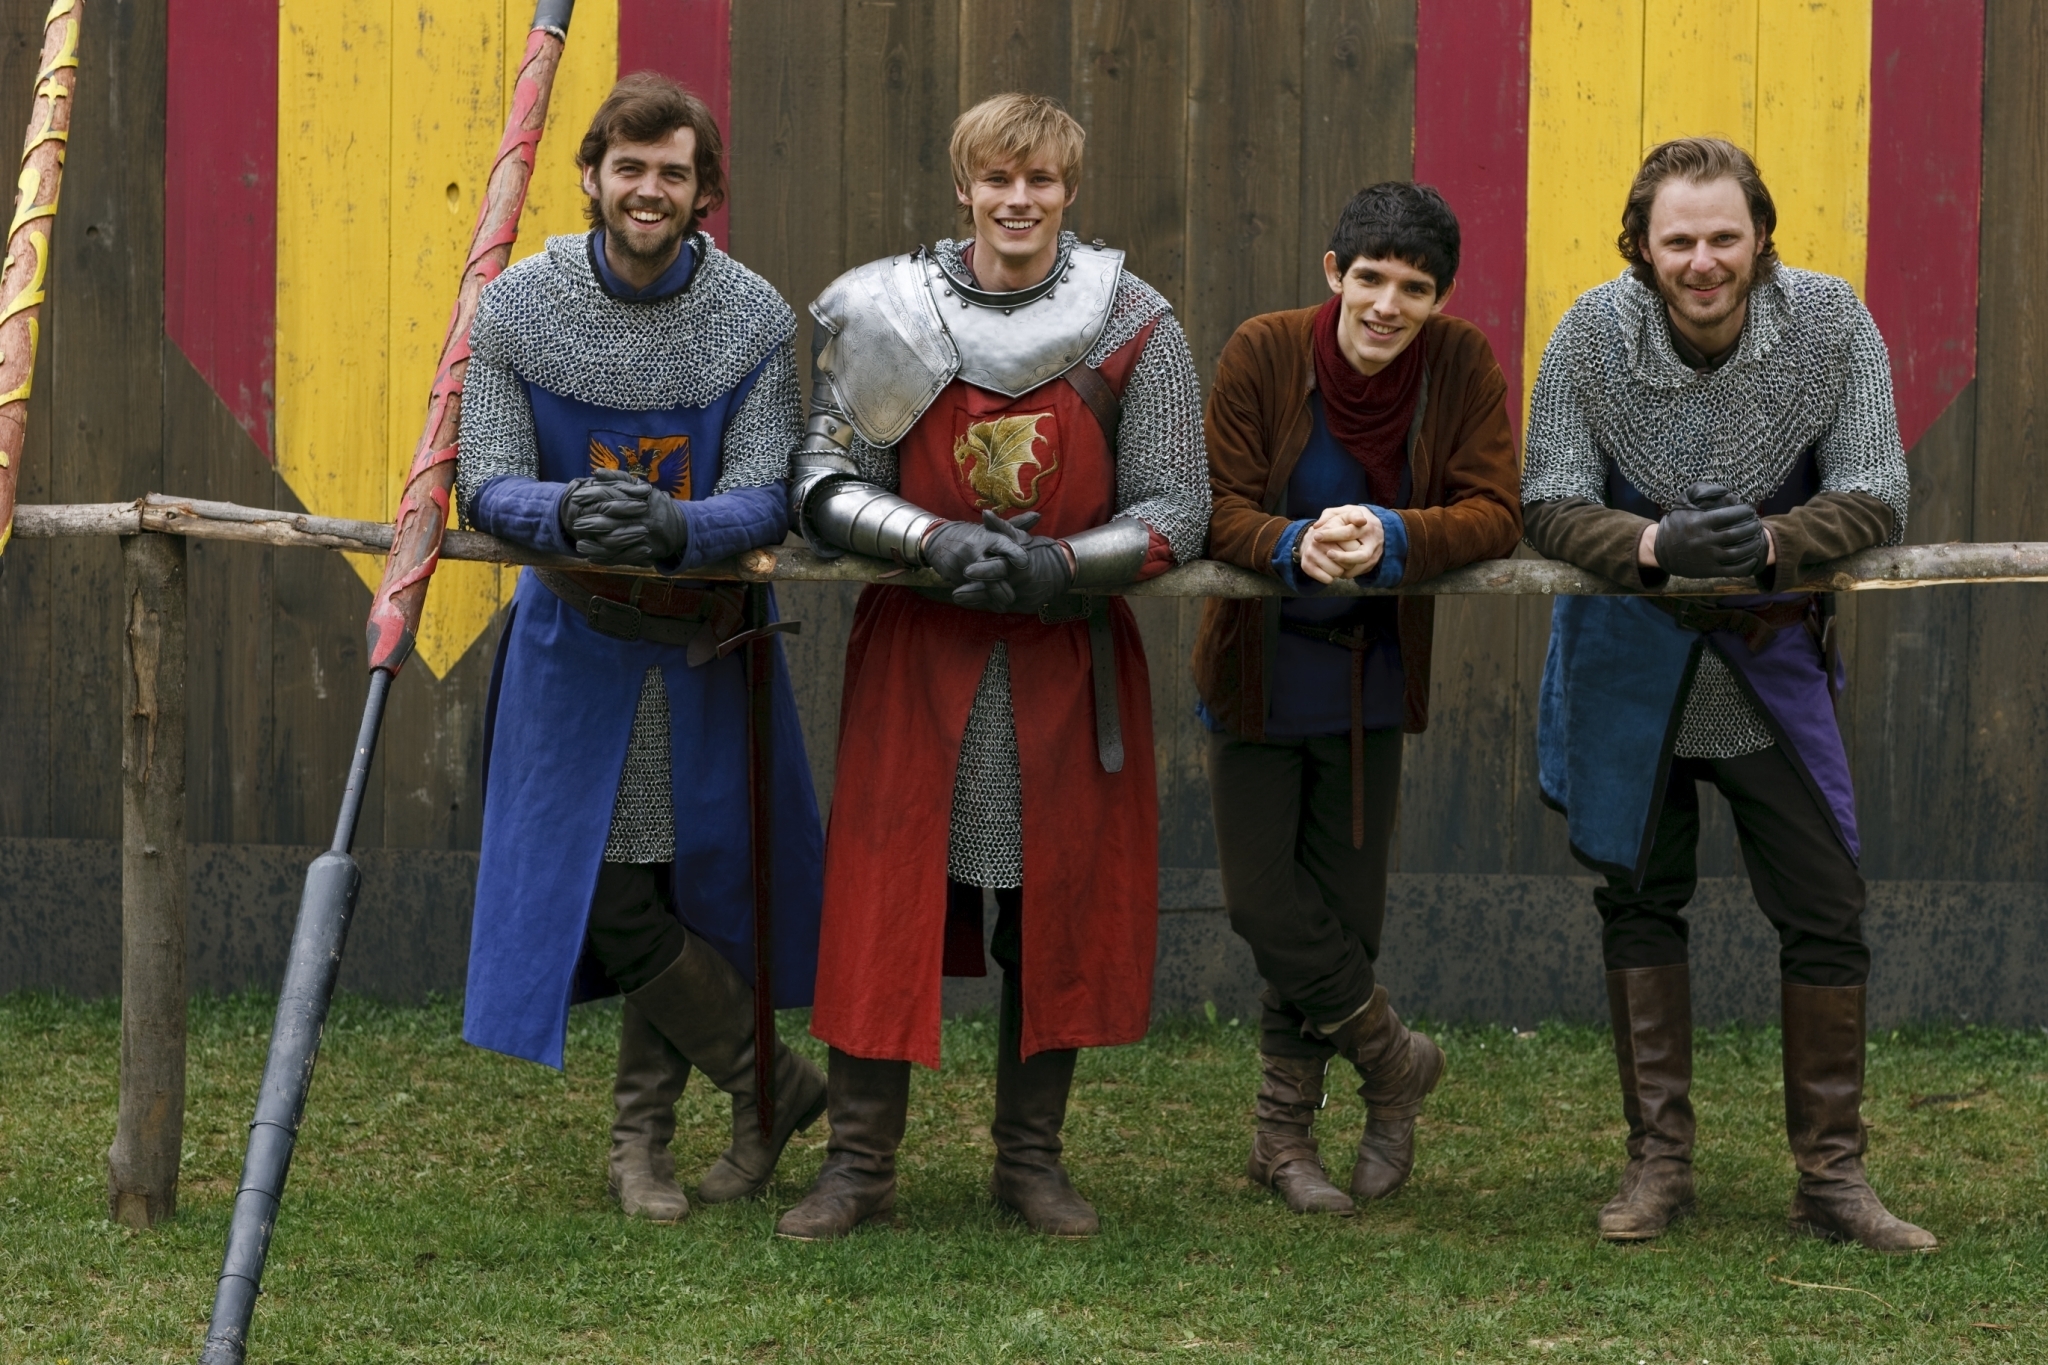 Colin, bradley and other actors